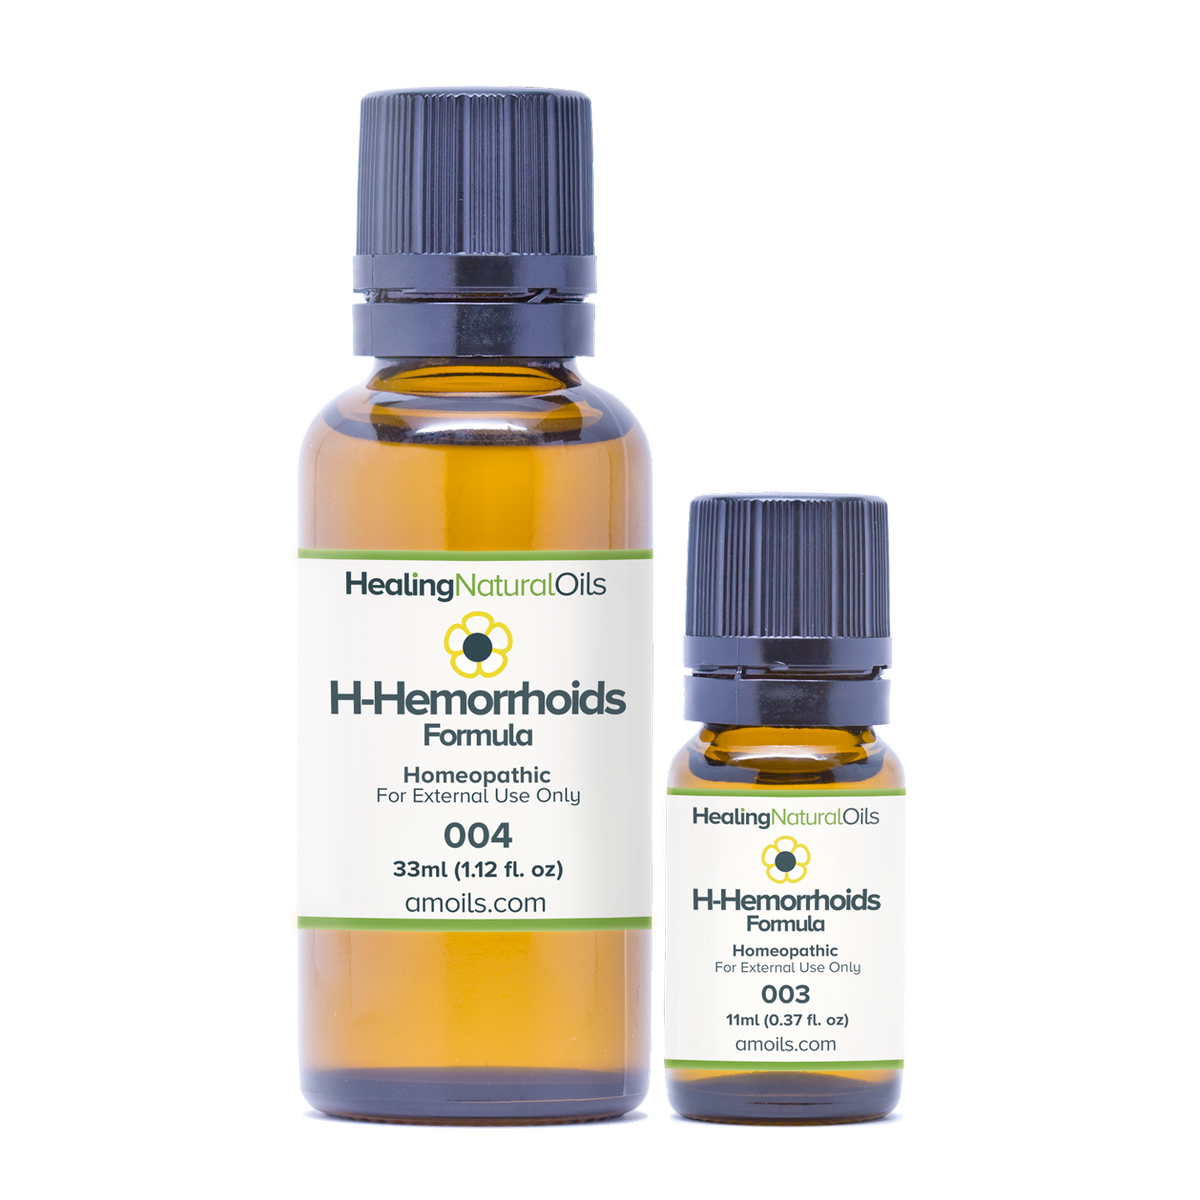 Healing Natural Oils H-Hemorrhoids Formula. Fast relief from hemorrhoids and bleeding hemorrhoids symptoms naturally. Quickly reduces swelling. Order today.